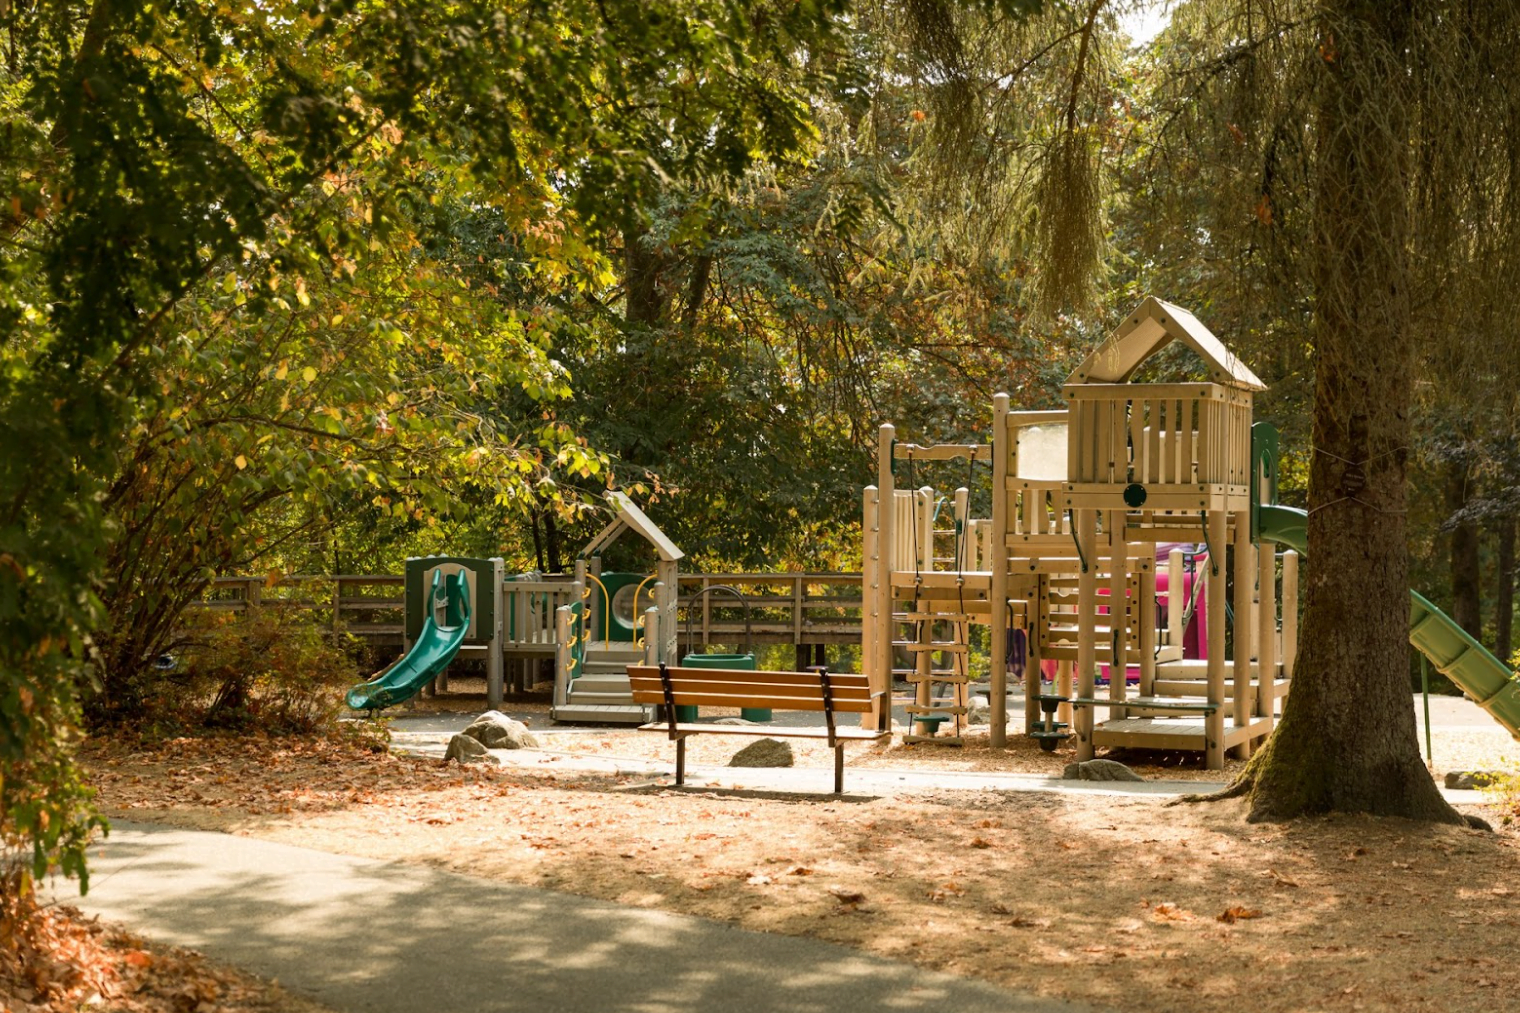 playground in redwood park, one of the best playgrounds in lower mainland